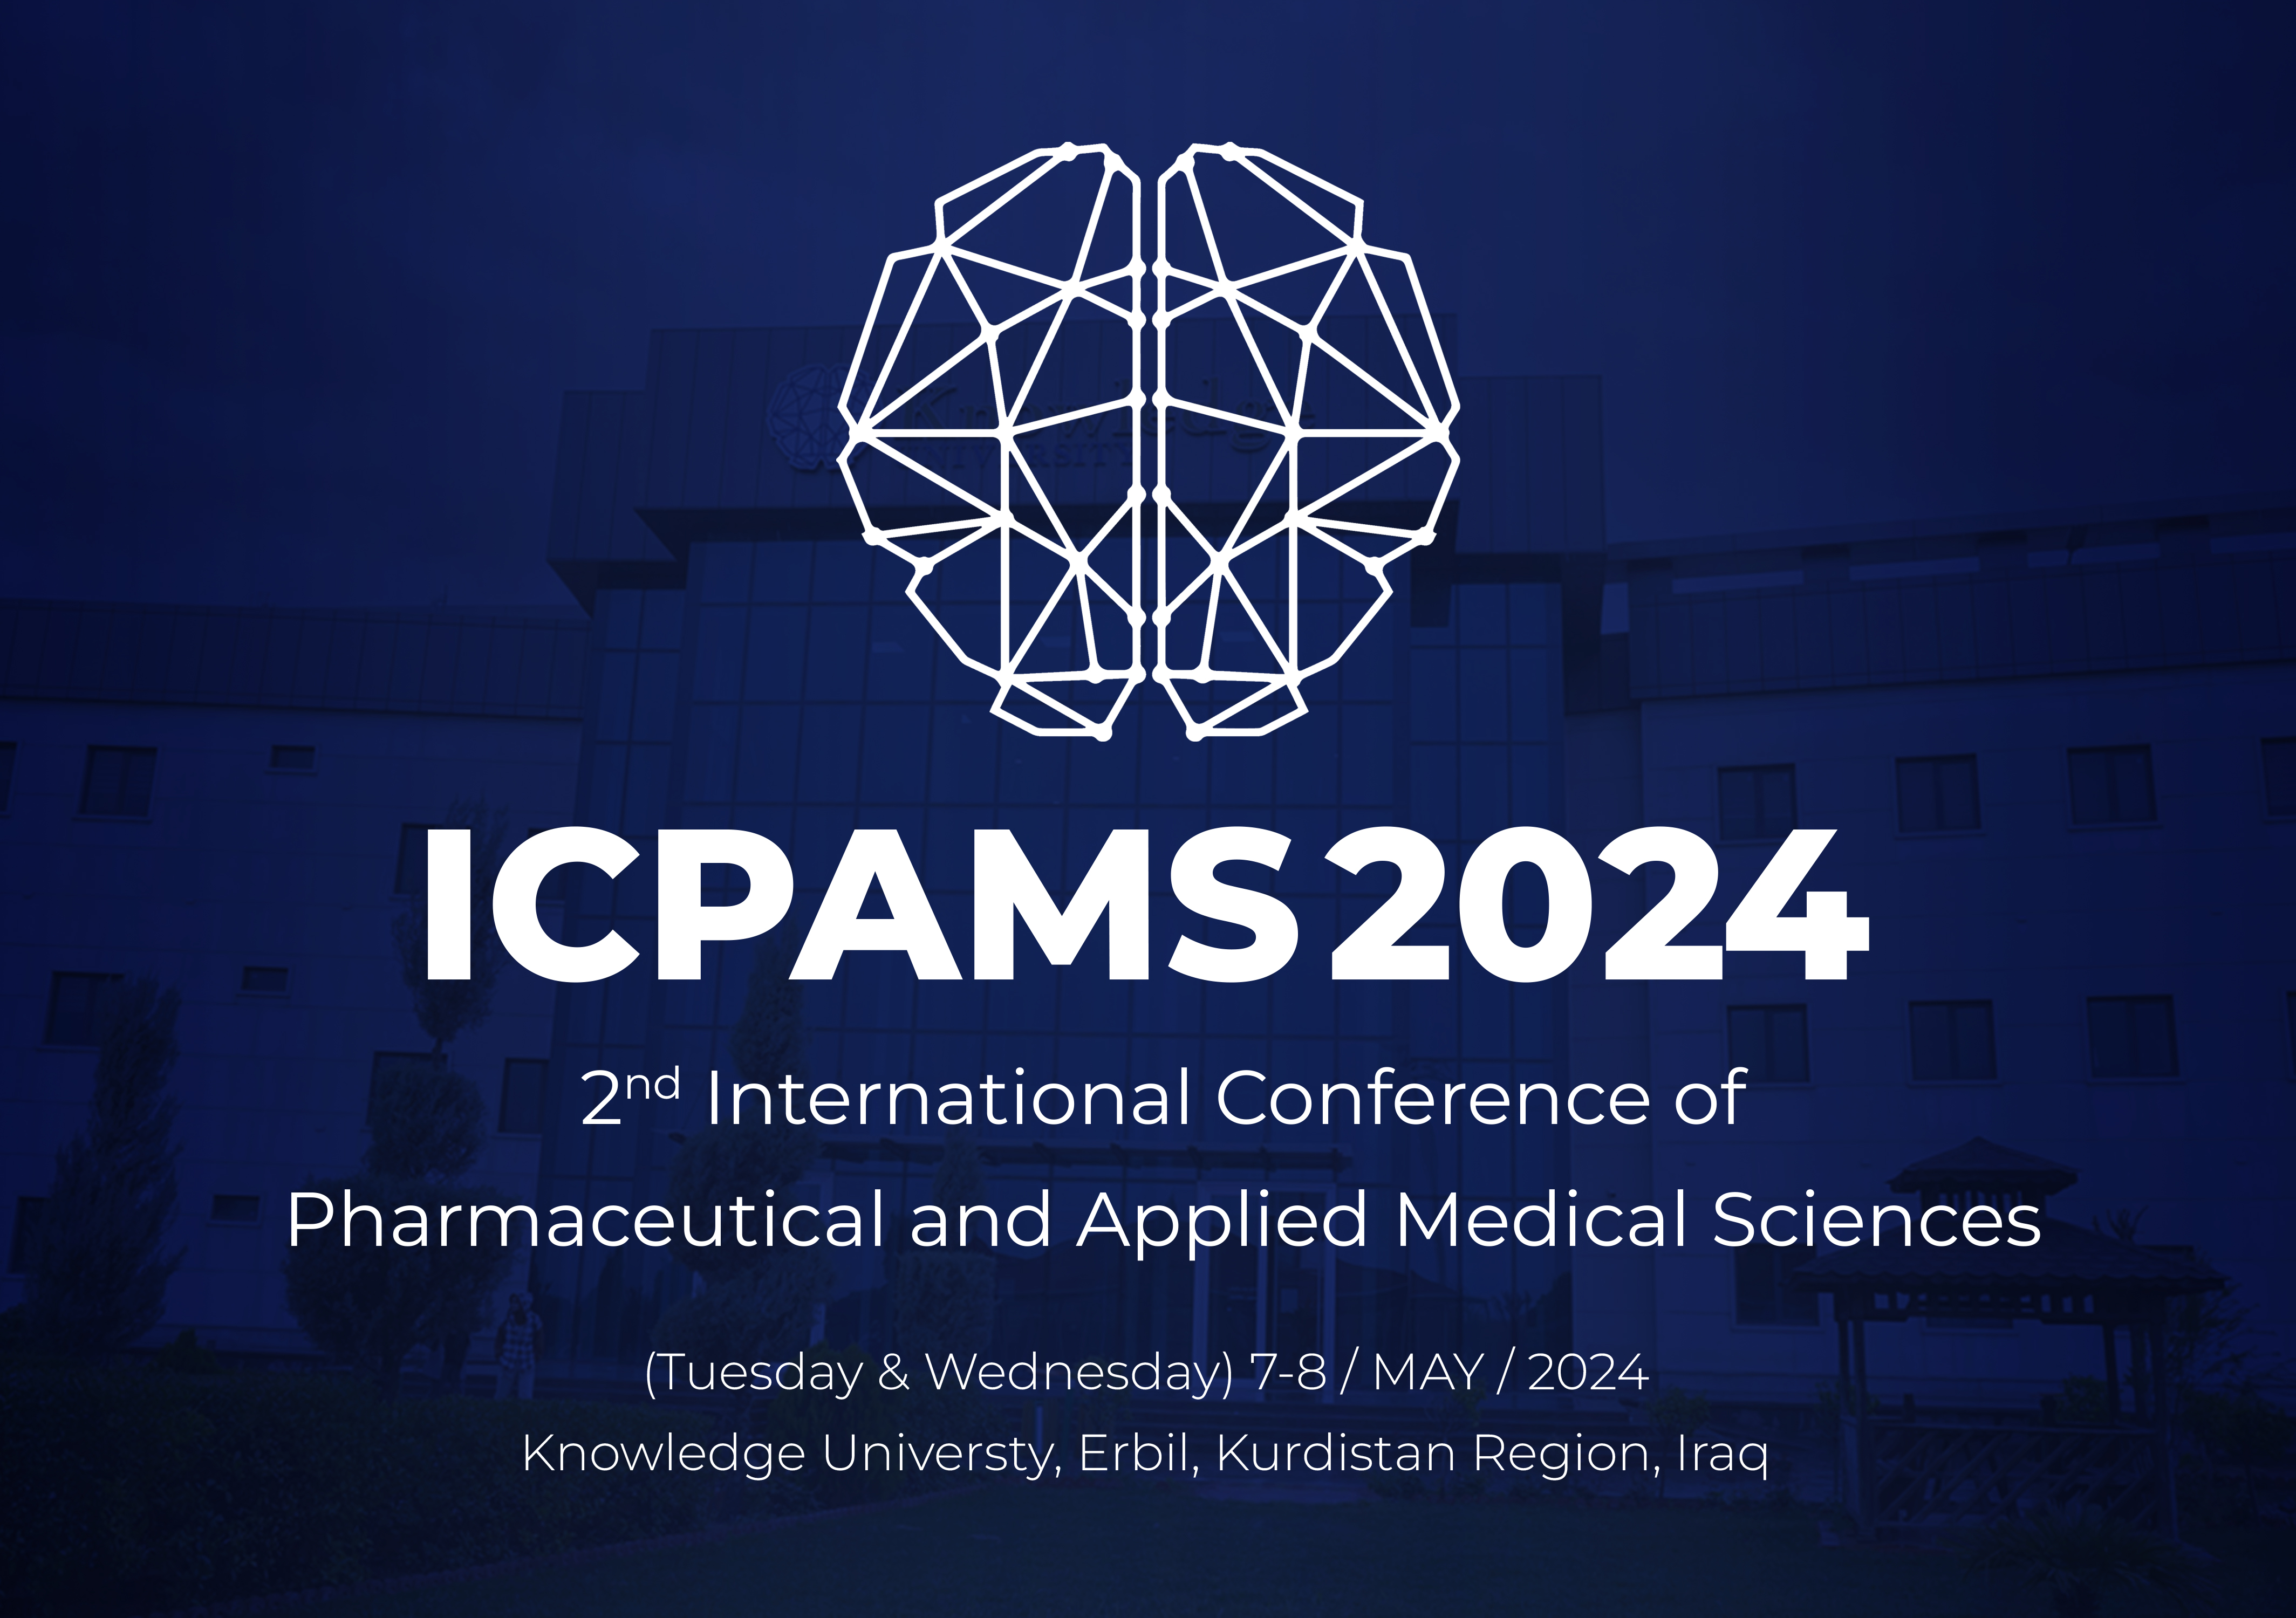 ICPAMS24: The 2nd International Conference of Pharmaceutical & Applied Medical Sciences